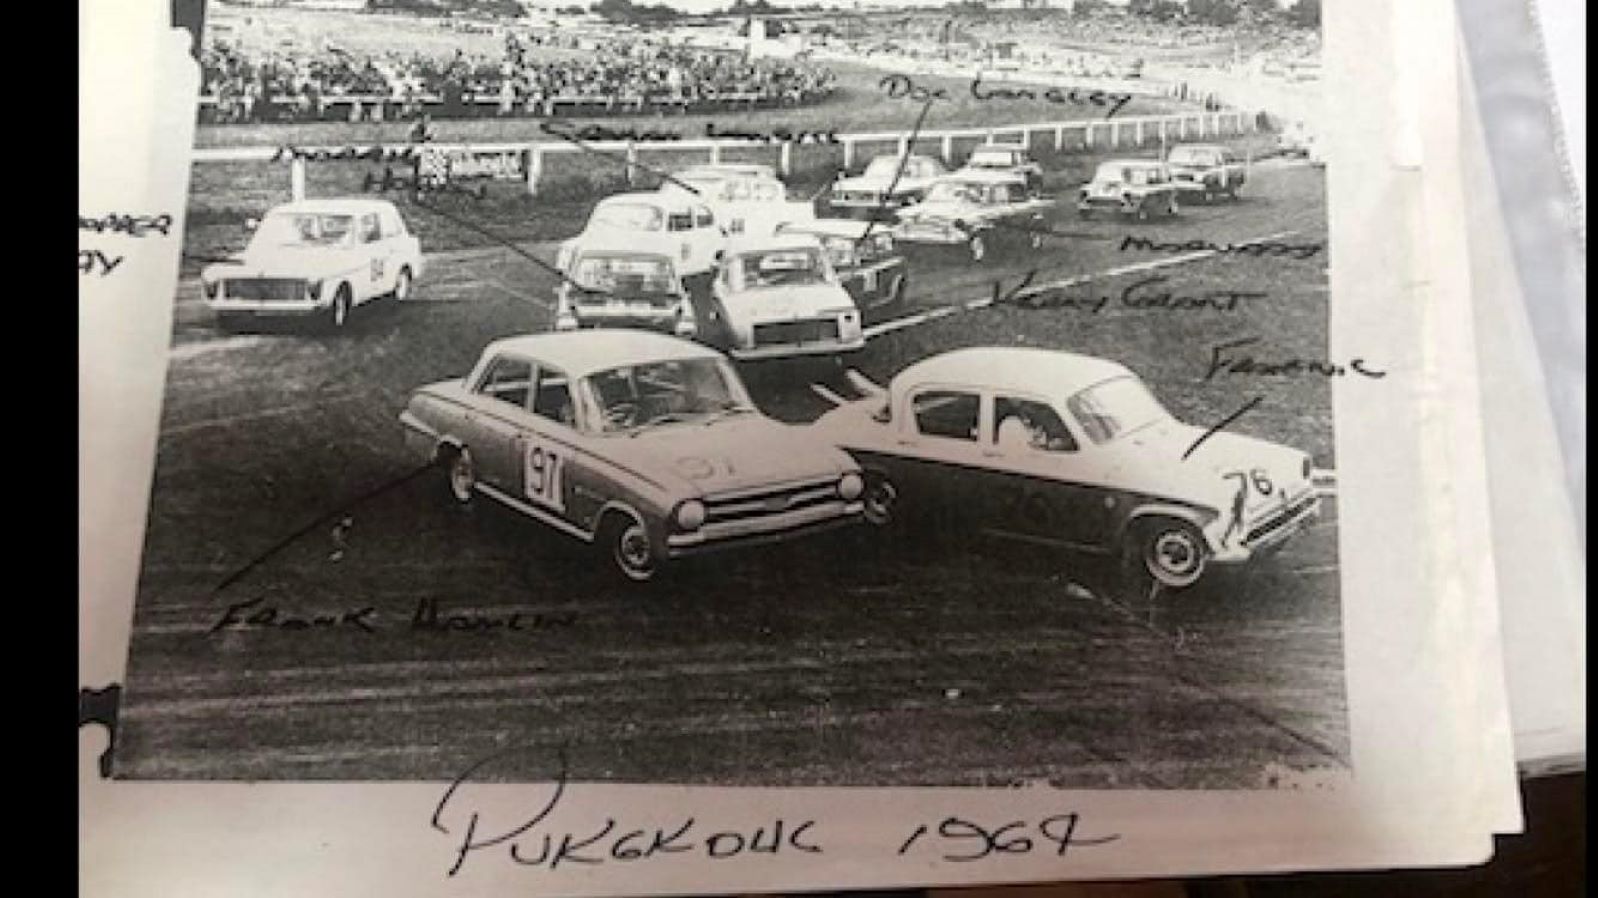 Name:  Pukekohe 1964 #022 1964 Saloon Car field at the Elbow - GP meeting Q 172 kb arch HVRA Bruce Dyer.jpg
Views: 334
Size:  172.4 KB